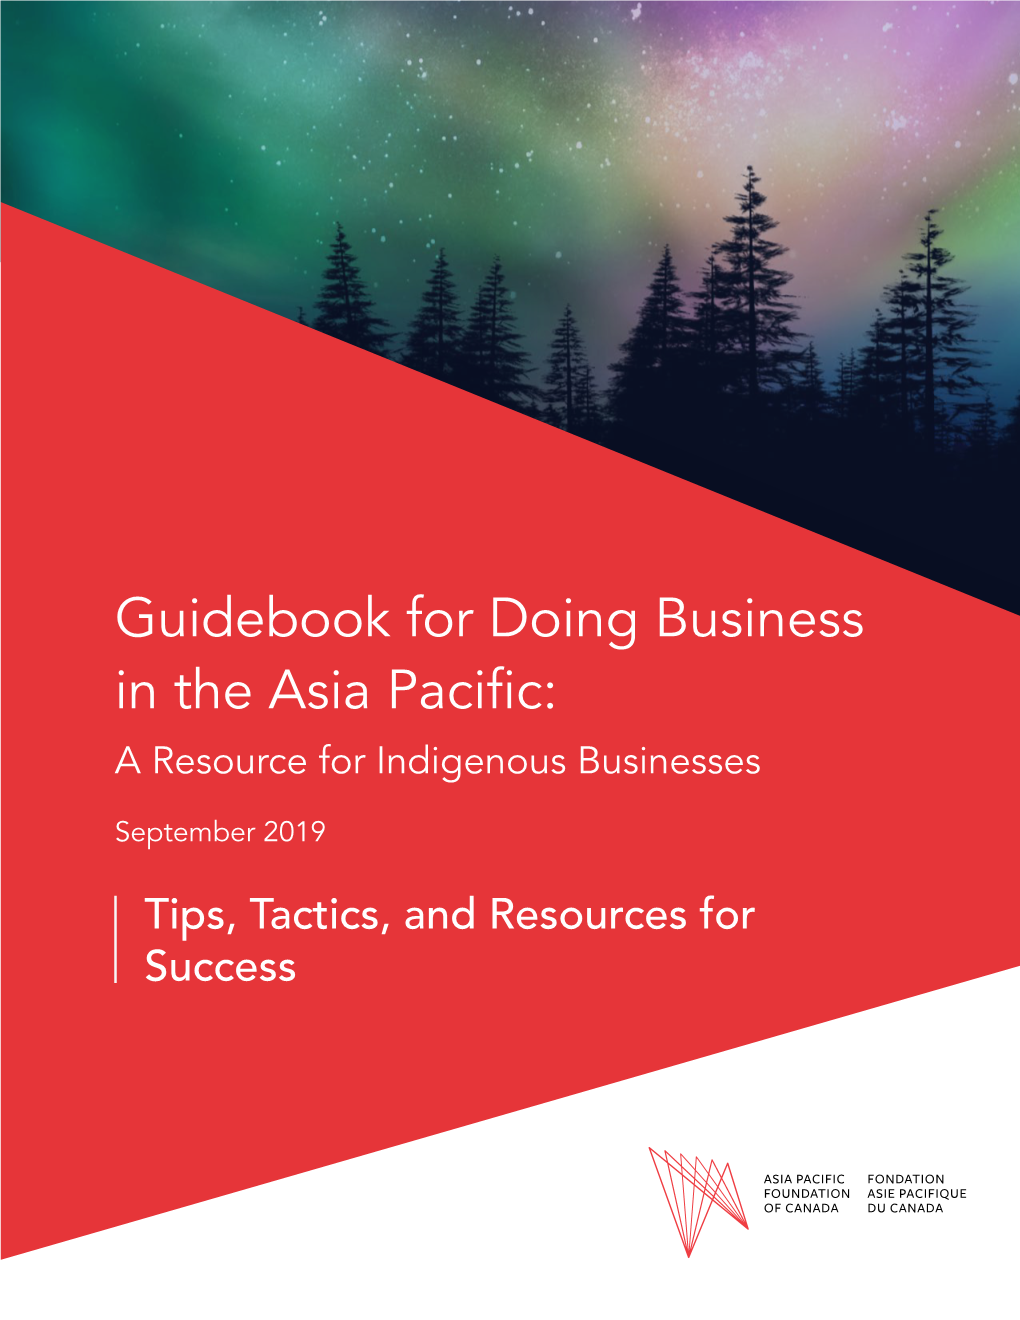 Guidebook for Doing Business in the Asia Pacific: a Resource for Indigenous Businesses